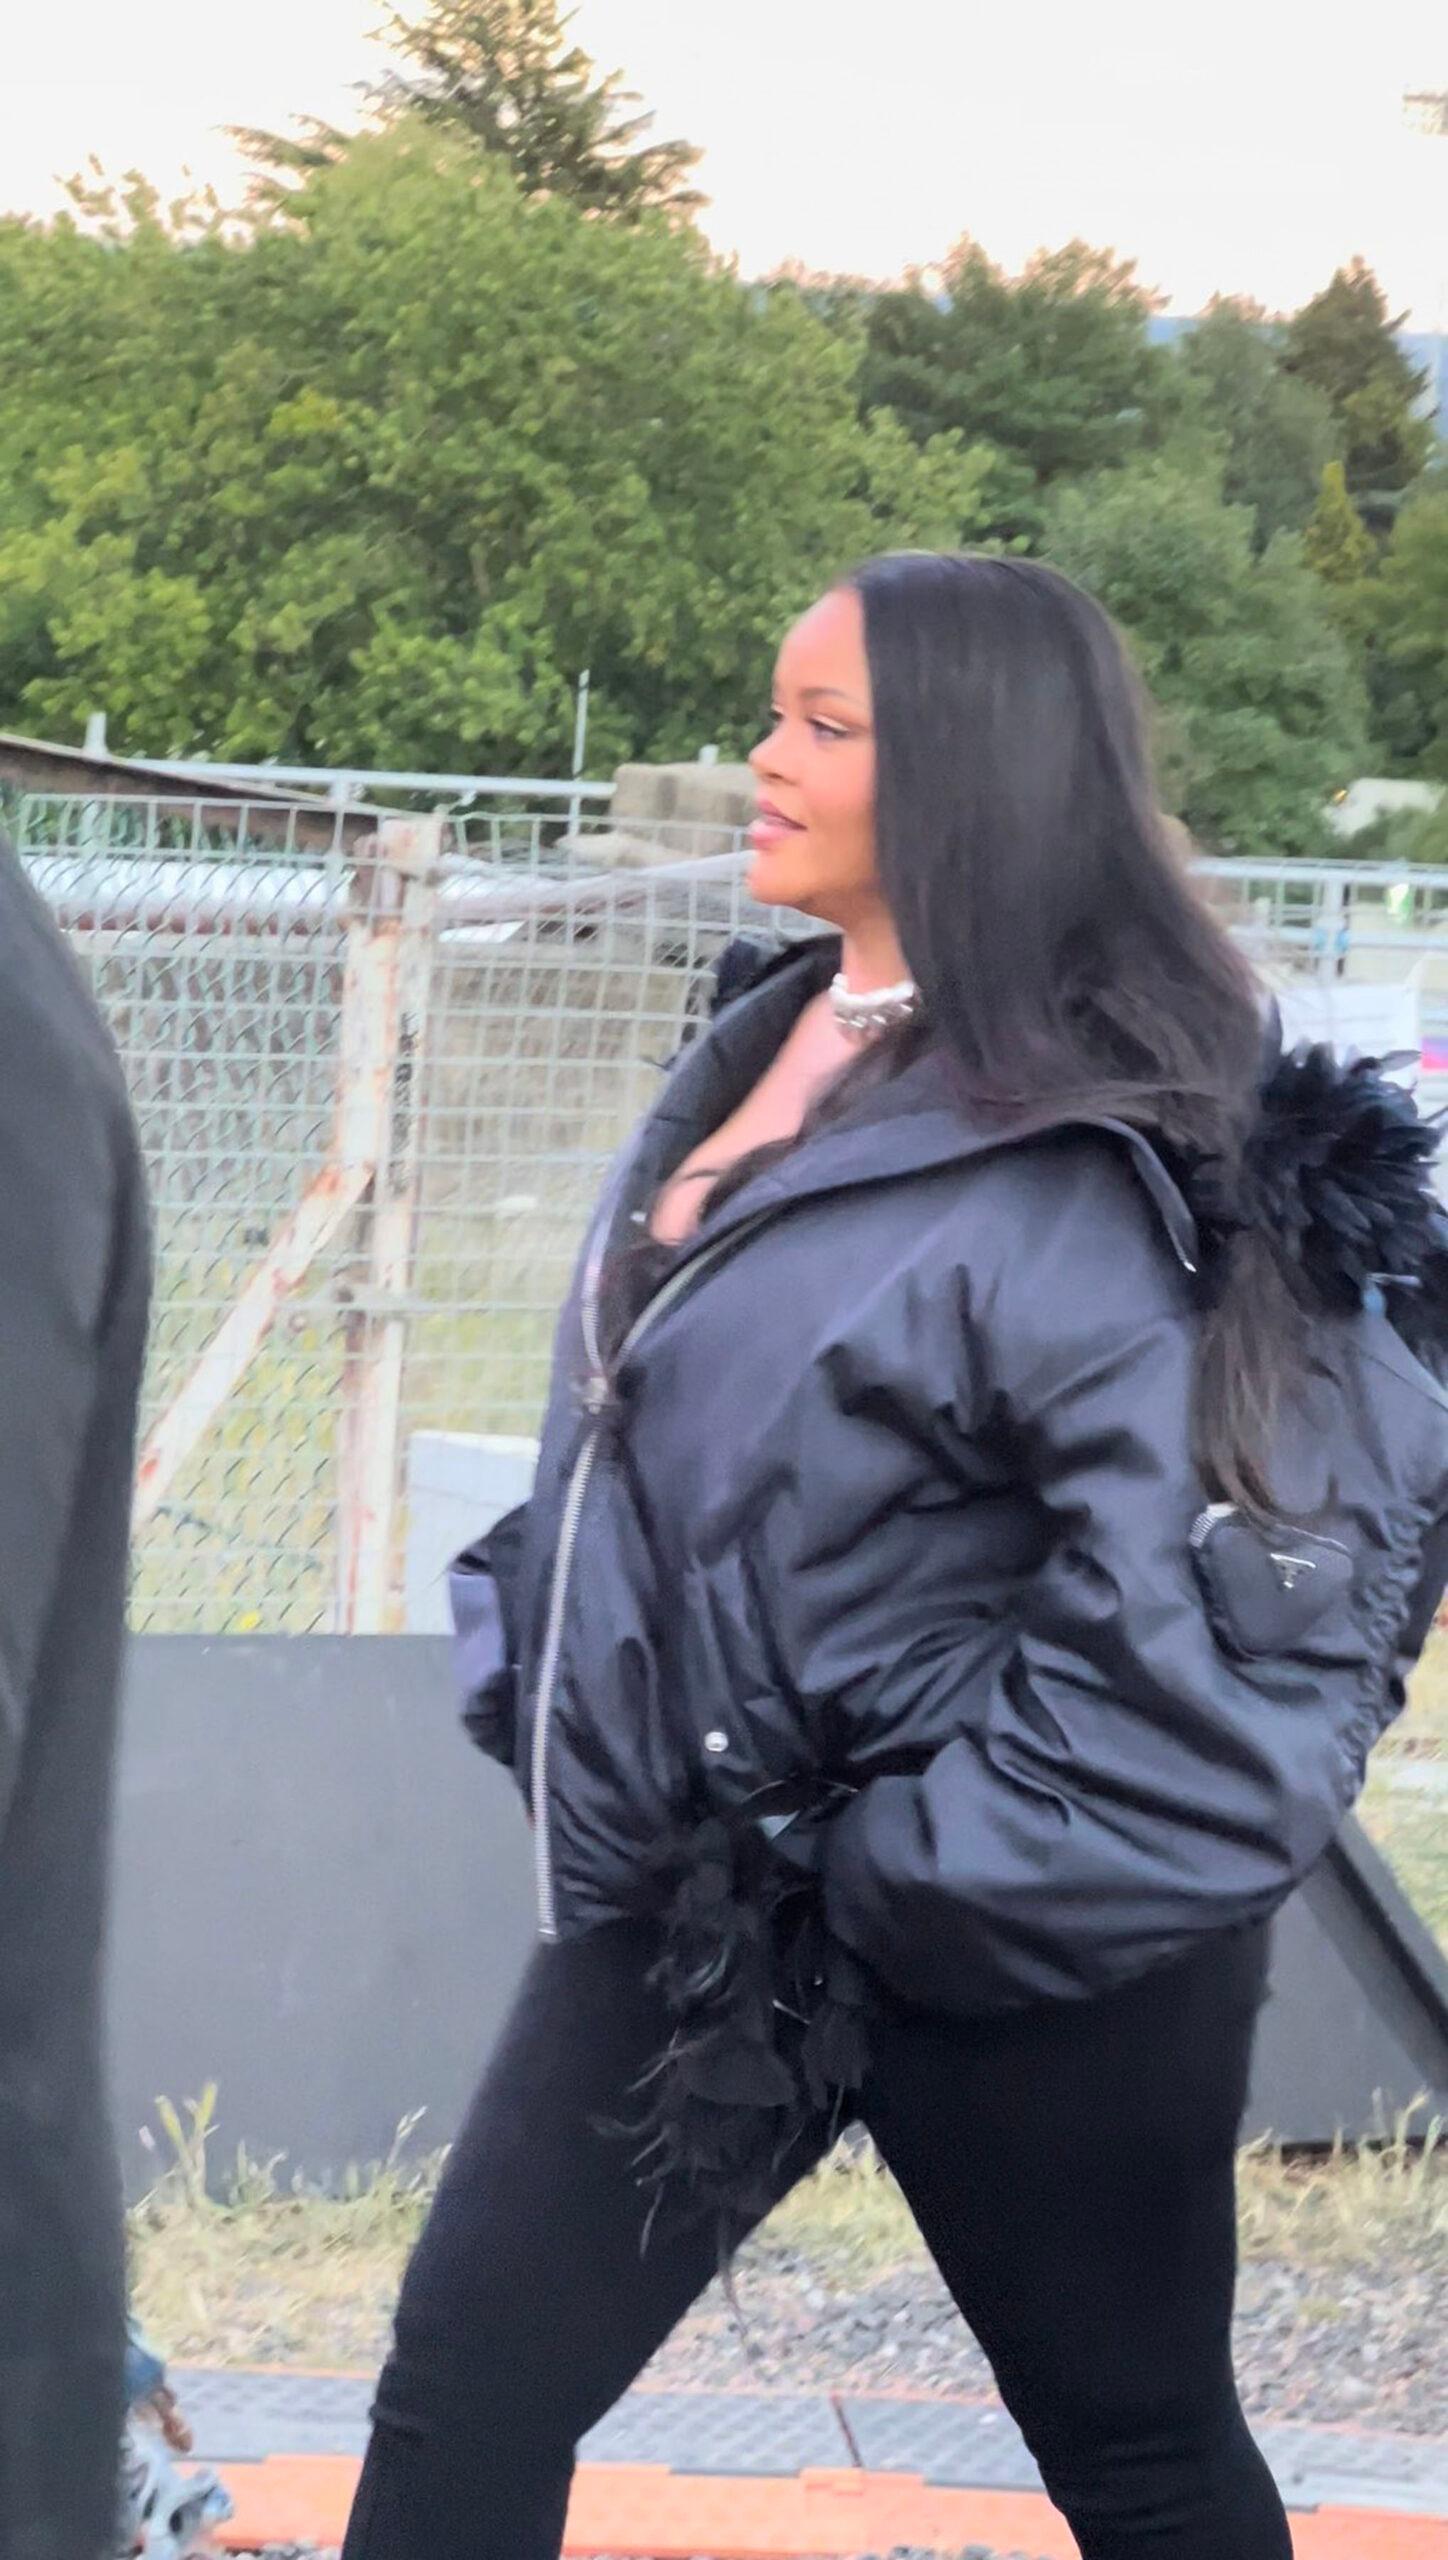 Rihanna makes her first public appearance since giving birth supporting A AP Rocky at Wireless Festival